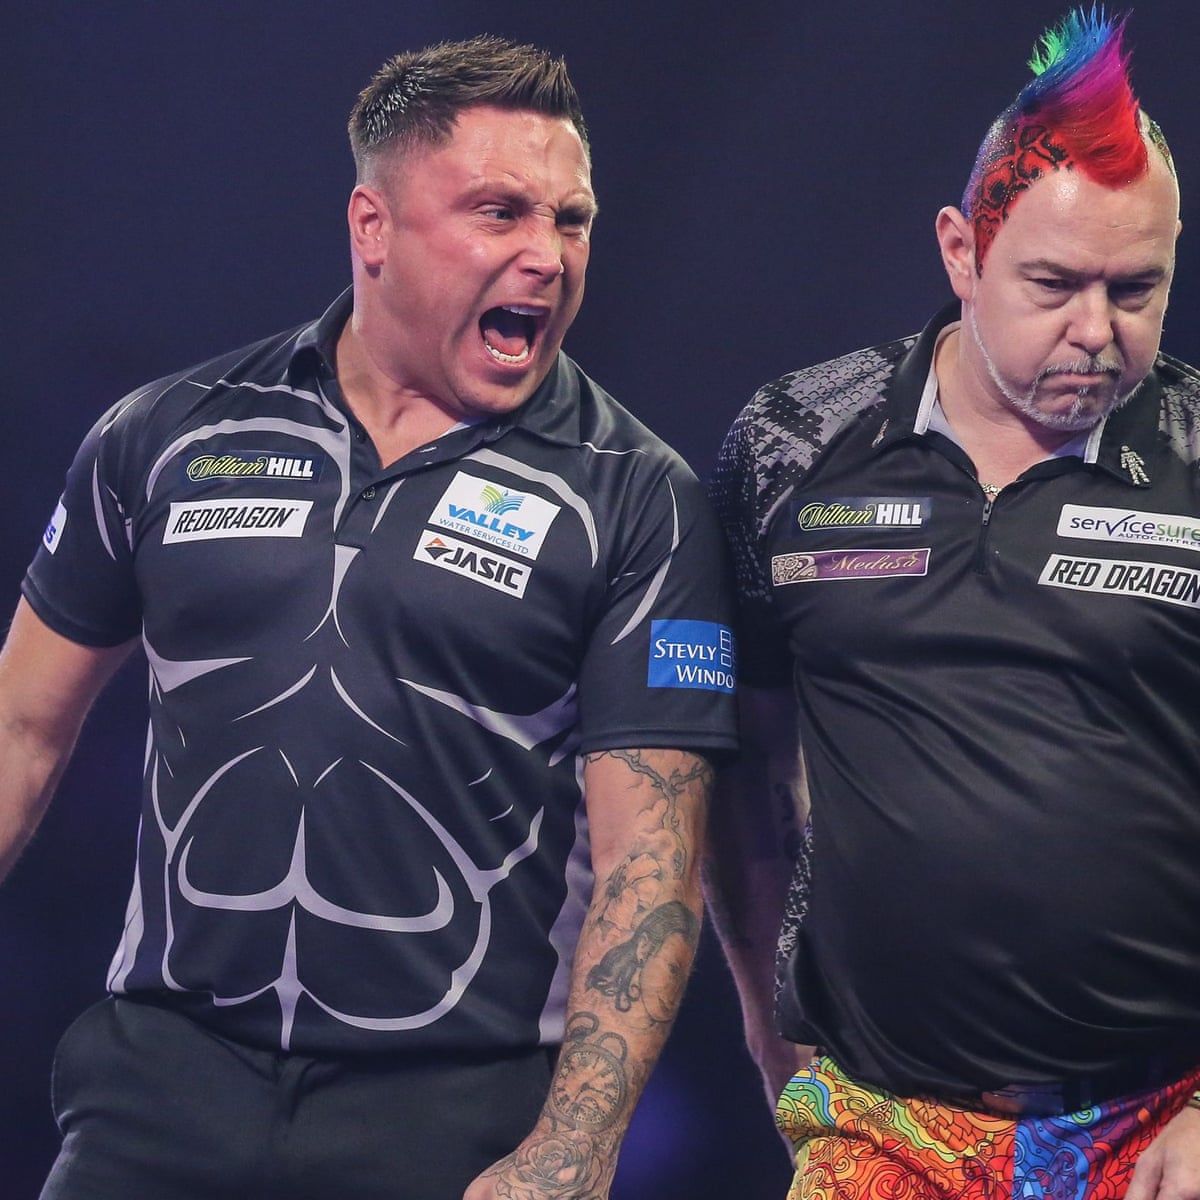 næve Reorganisere etc Iceman' Price apologises after losing cool in heated world darts semi-final  | Darts | The Guardian